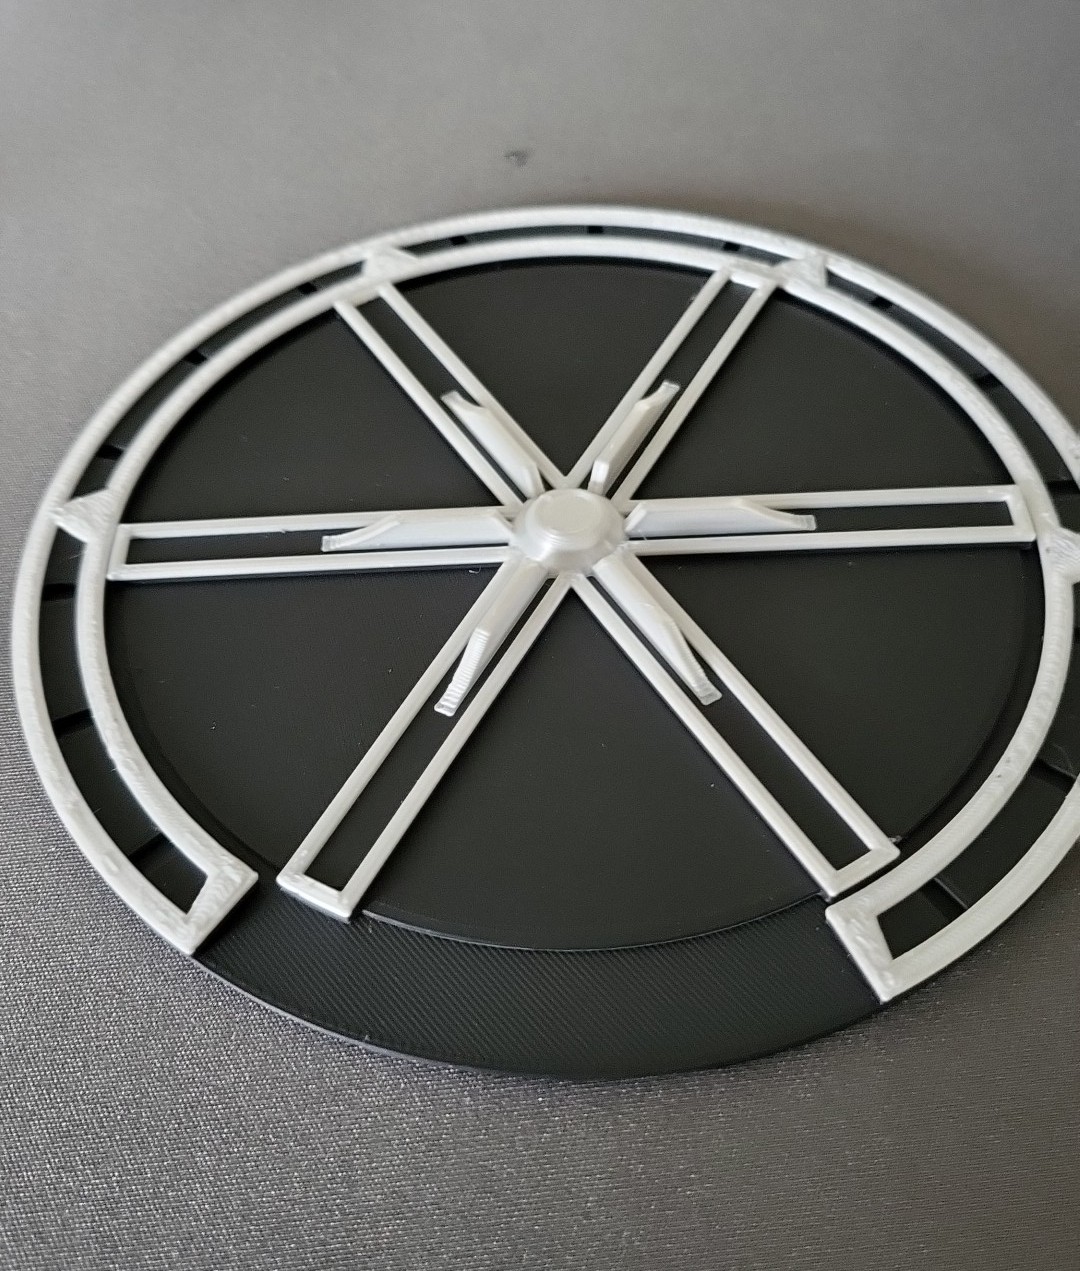 Construction wheel with webbing